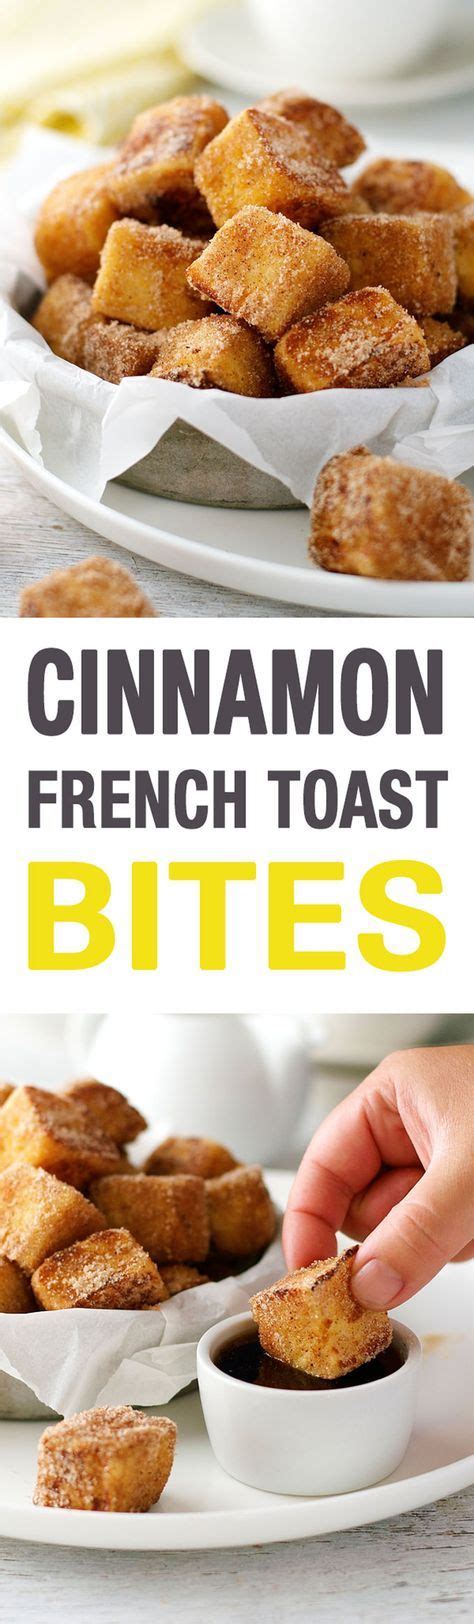 Once you've got the basic technique down, you can branch out into all kinds of variations using different breads, flavorings, cooking methods, and toppings. Cinnamon French Toast Bites | Recipe | French toast bites, Cinnamon french toast, Brunch recipes